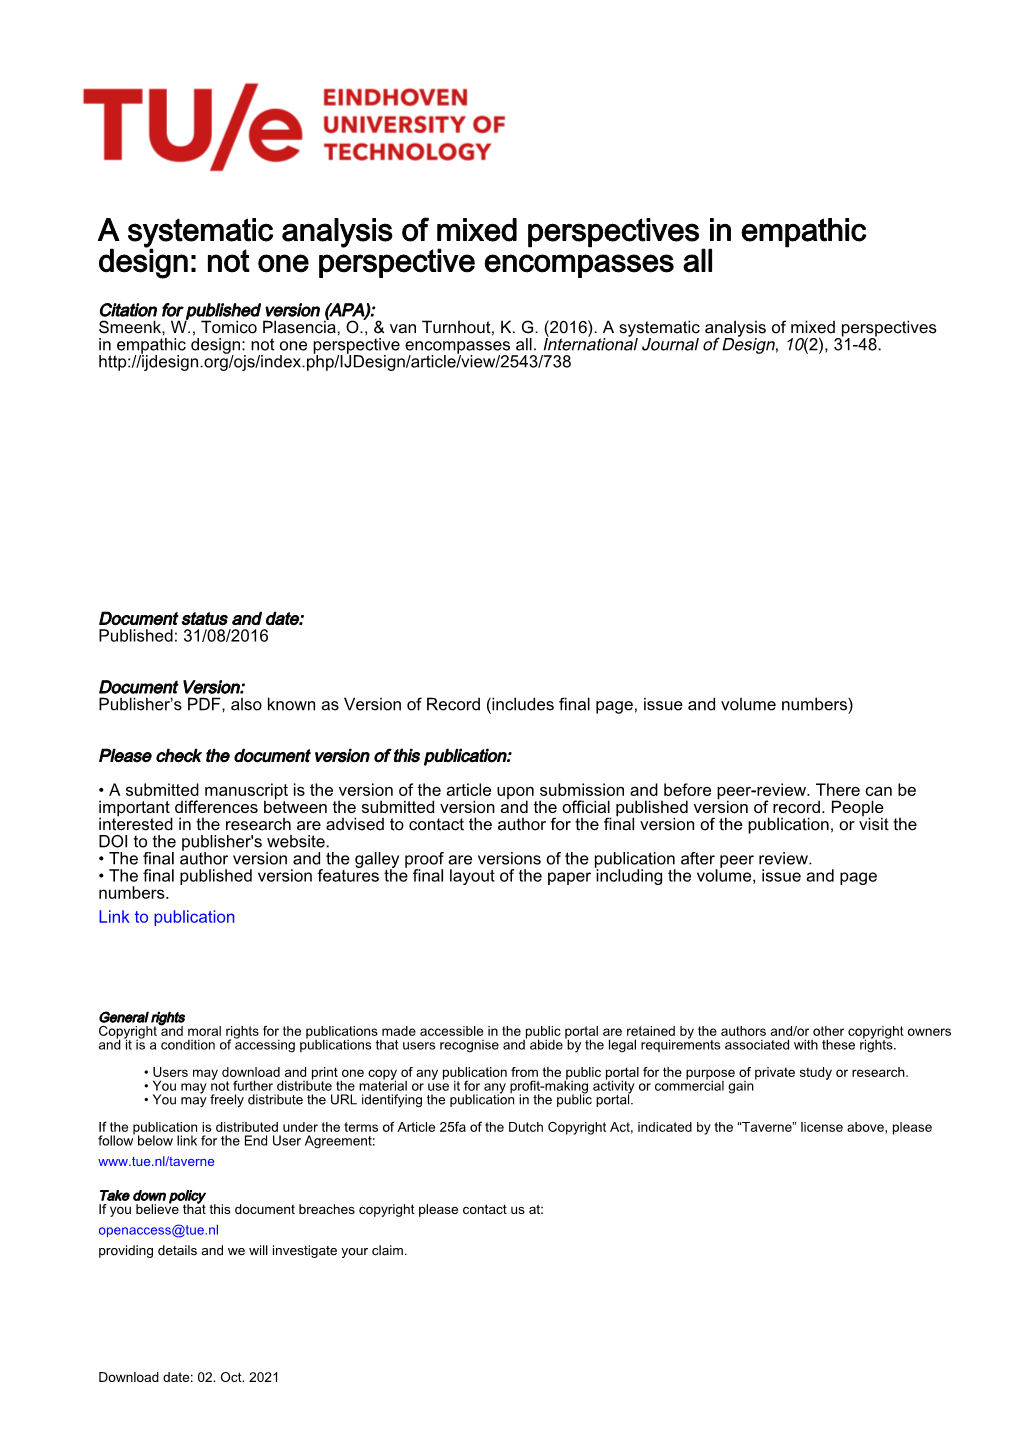 A Systematic Analysis of Mixed Perspectives in Empathic Design: Not One Perspective Encompasses All